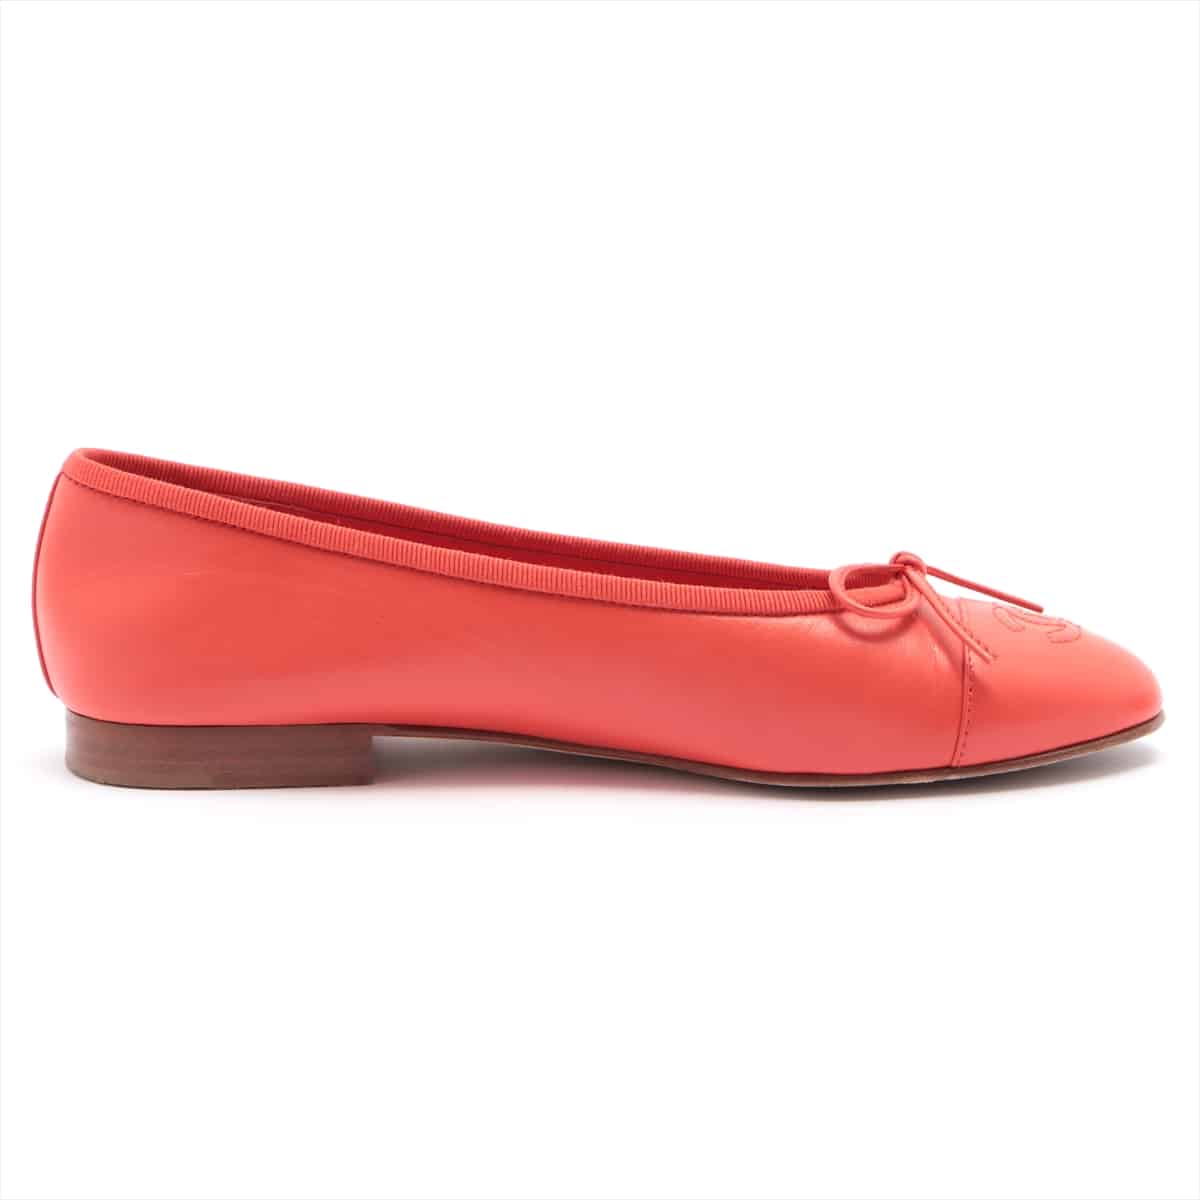 Chanel Leather Pumps 37 Ladies' Red Coco Mark